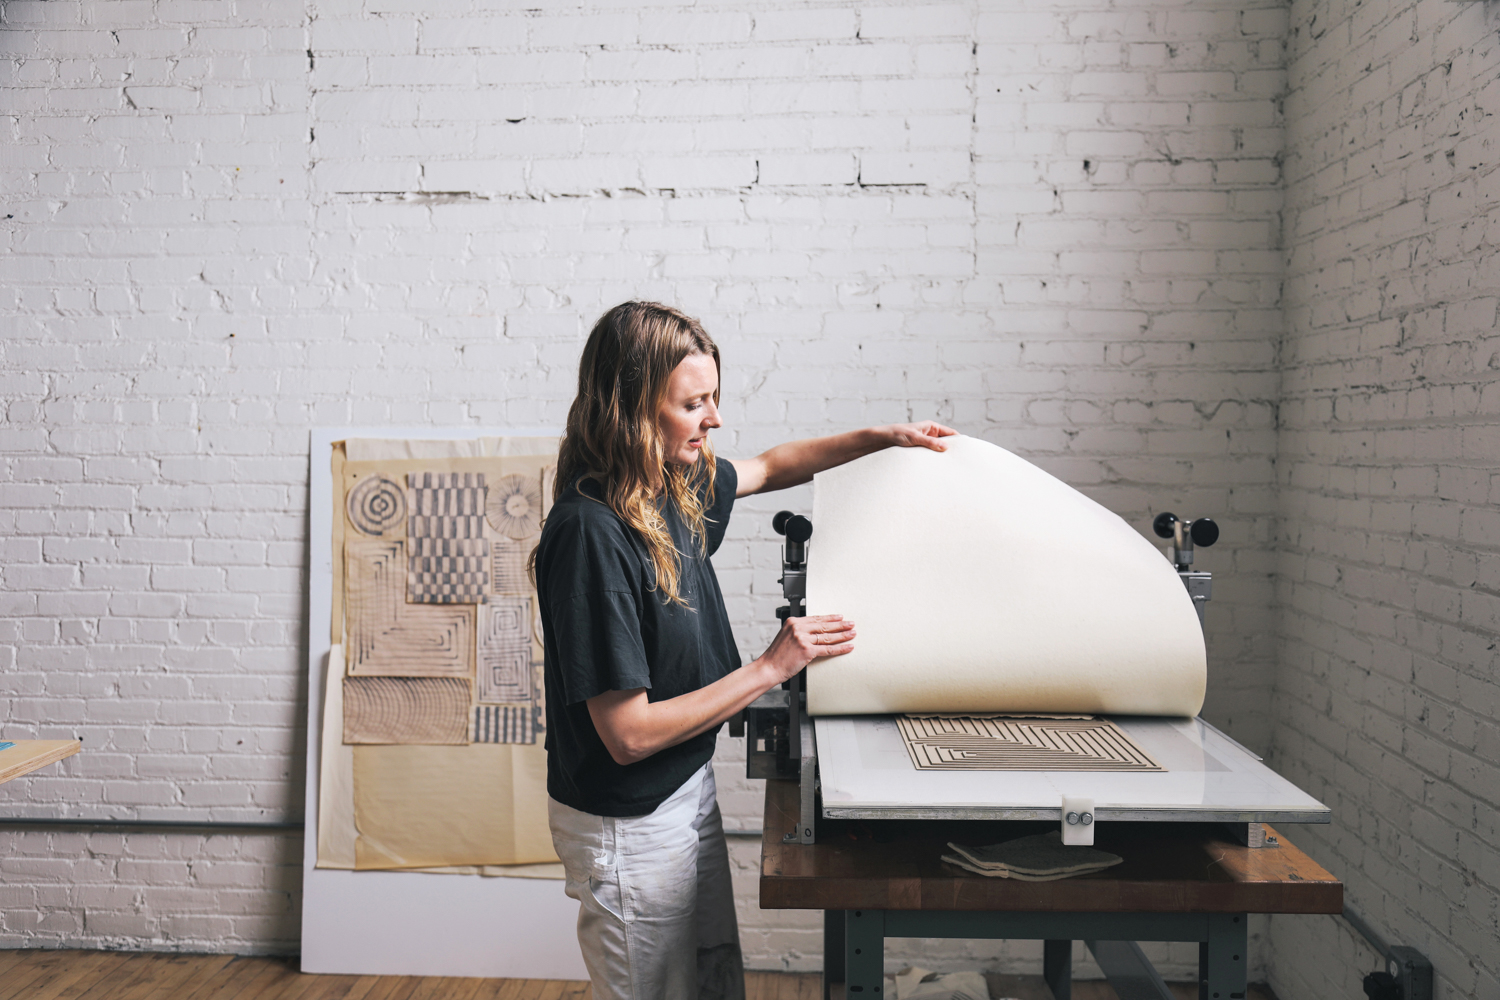 artist Cheryl Humphreys stands beside a paper press in front of sketches and white brick wall